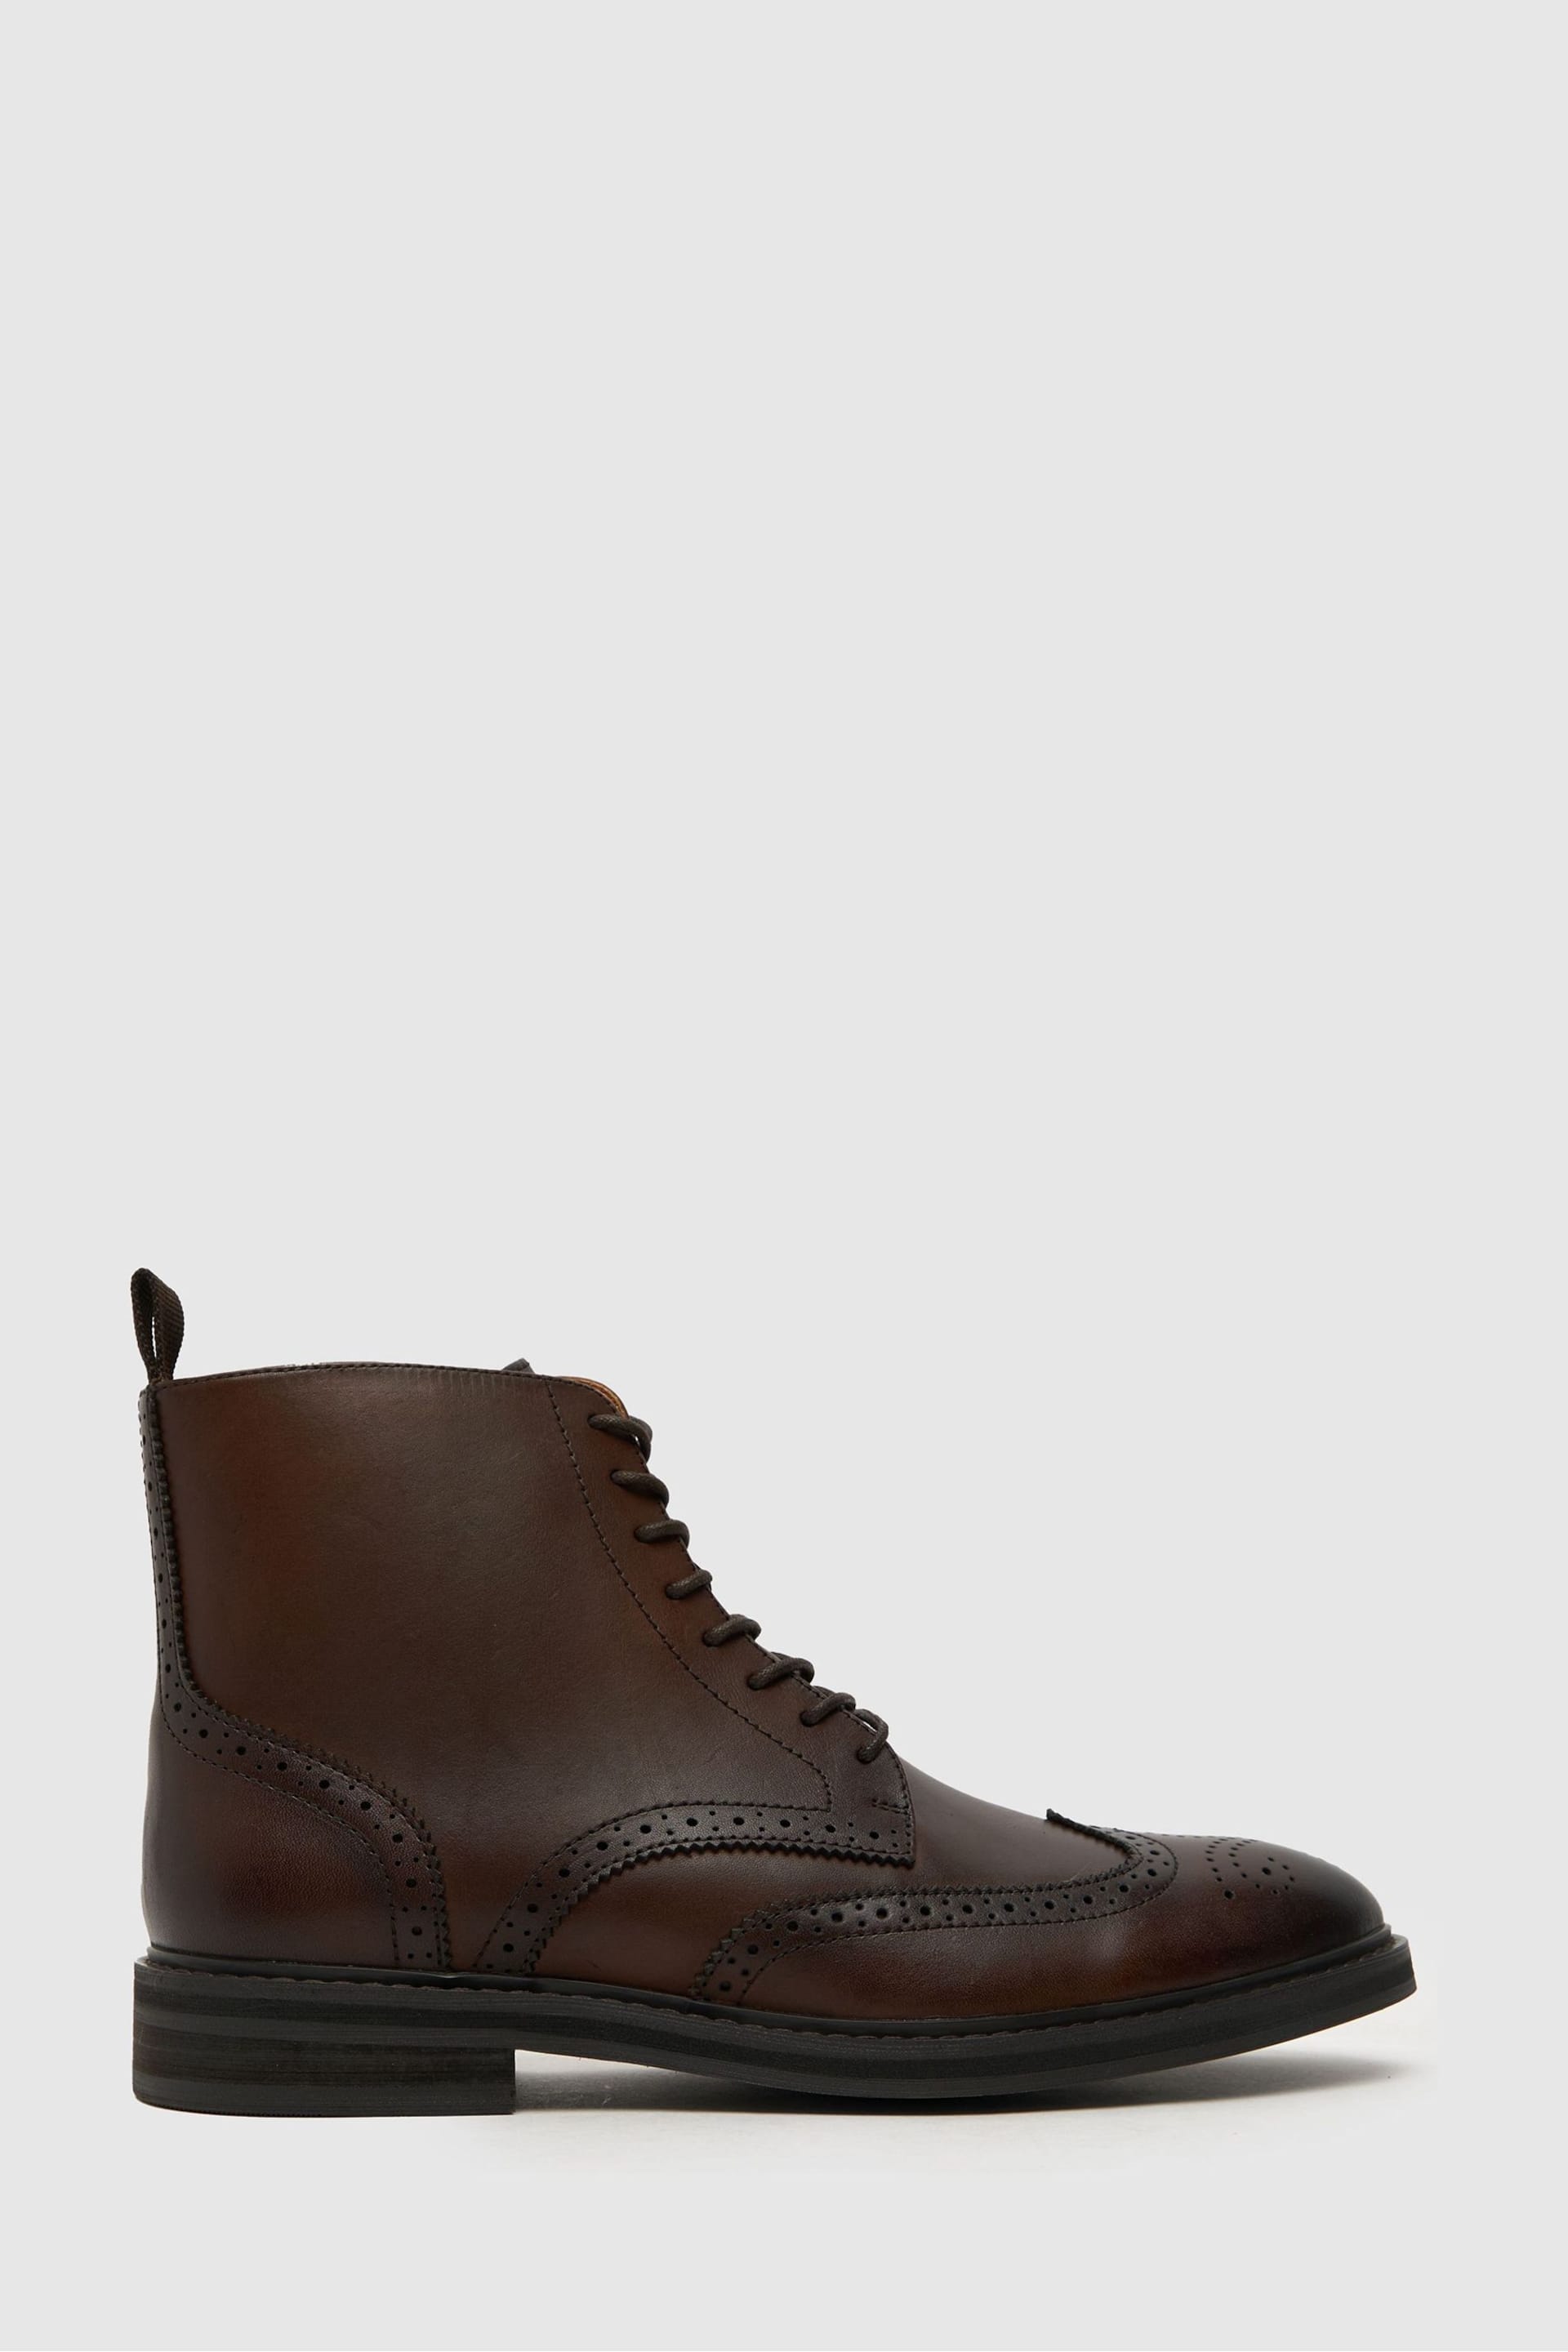 Schuh Draco Brogue Brown Boots - Image 1 of 4